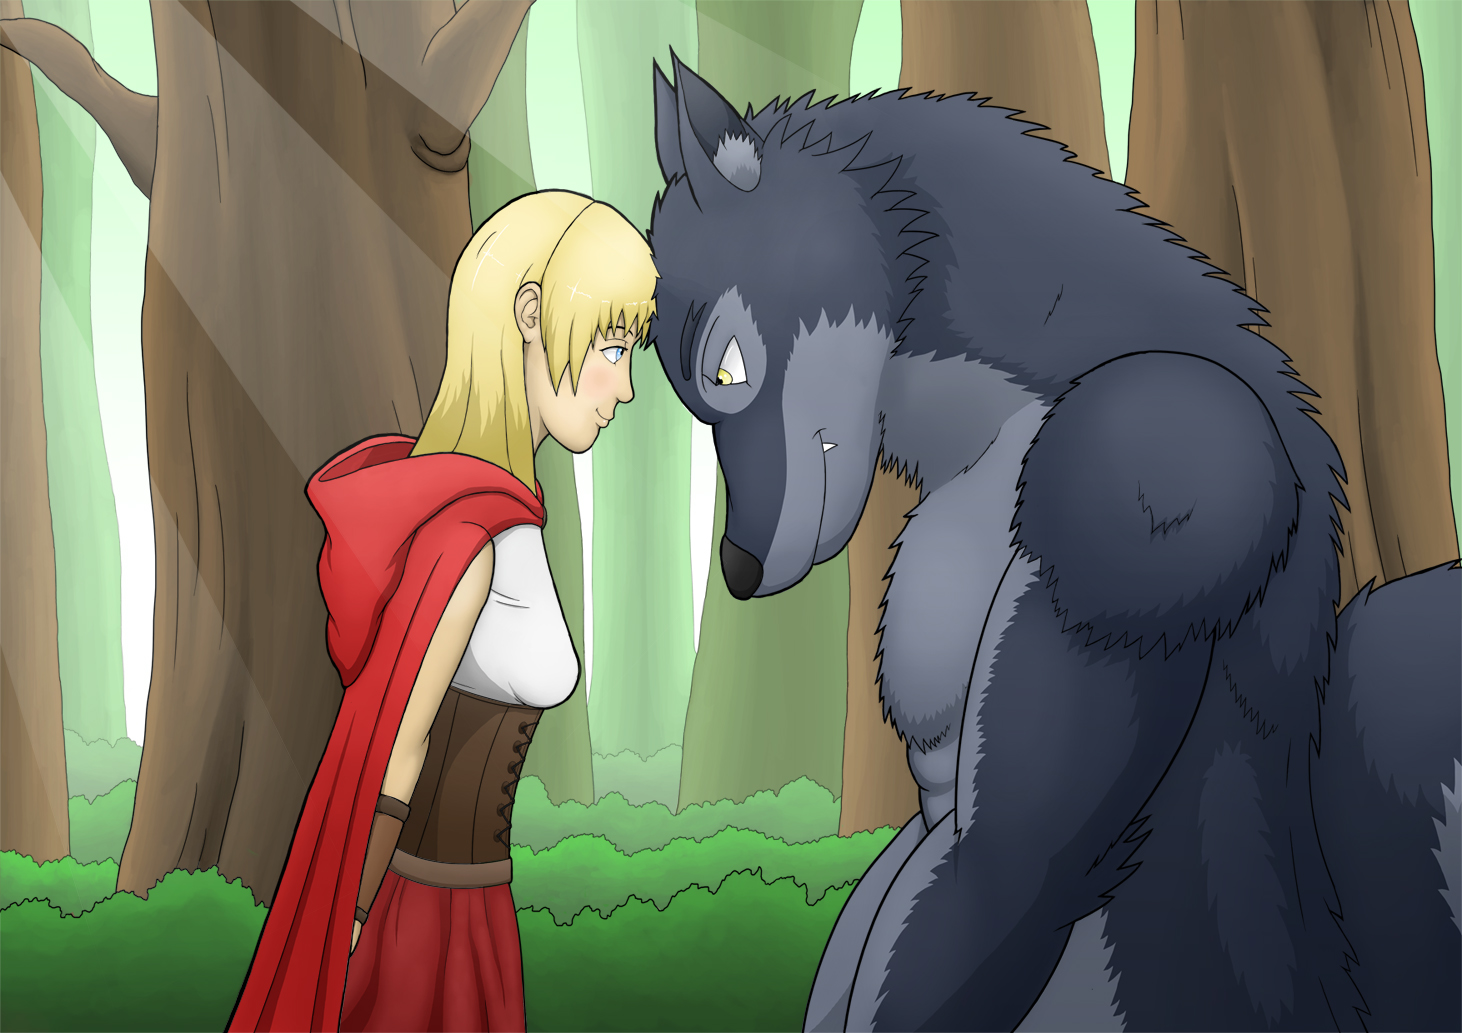 red_riding_hood_and_mr_wolf_by_grimgor09-d7krcad.jpg